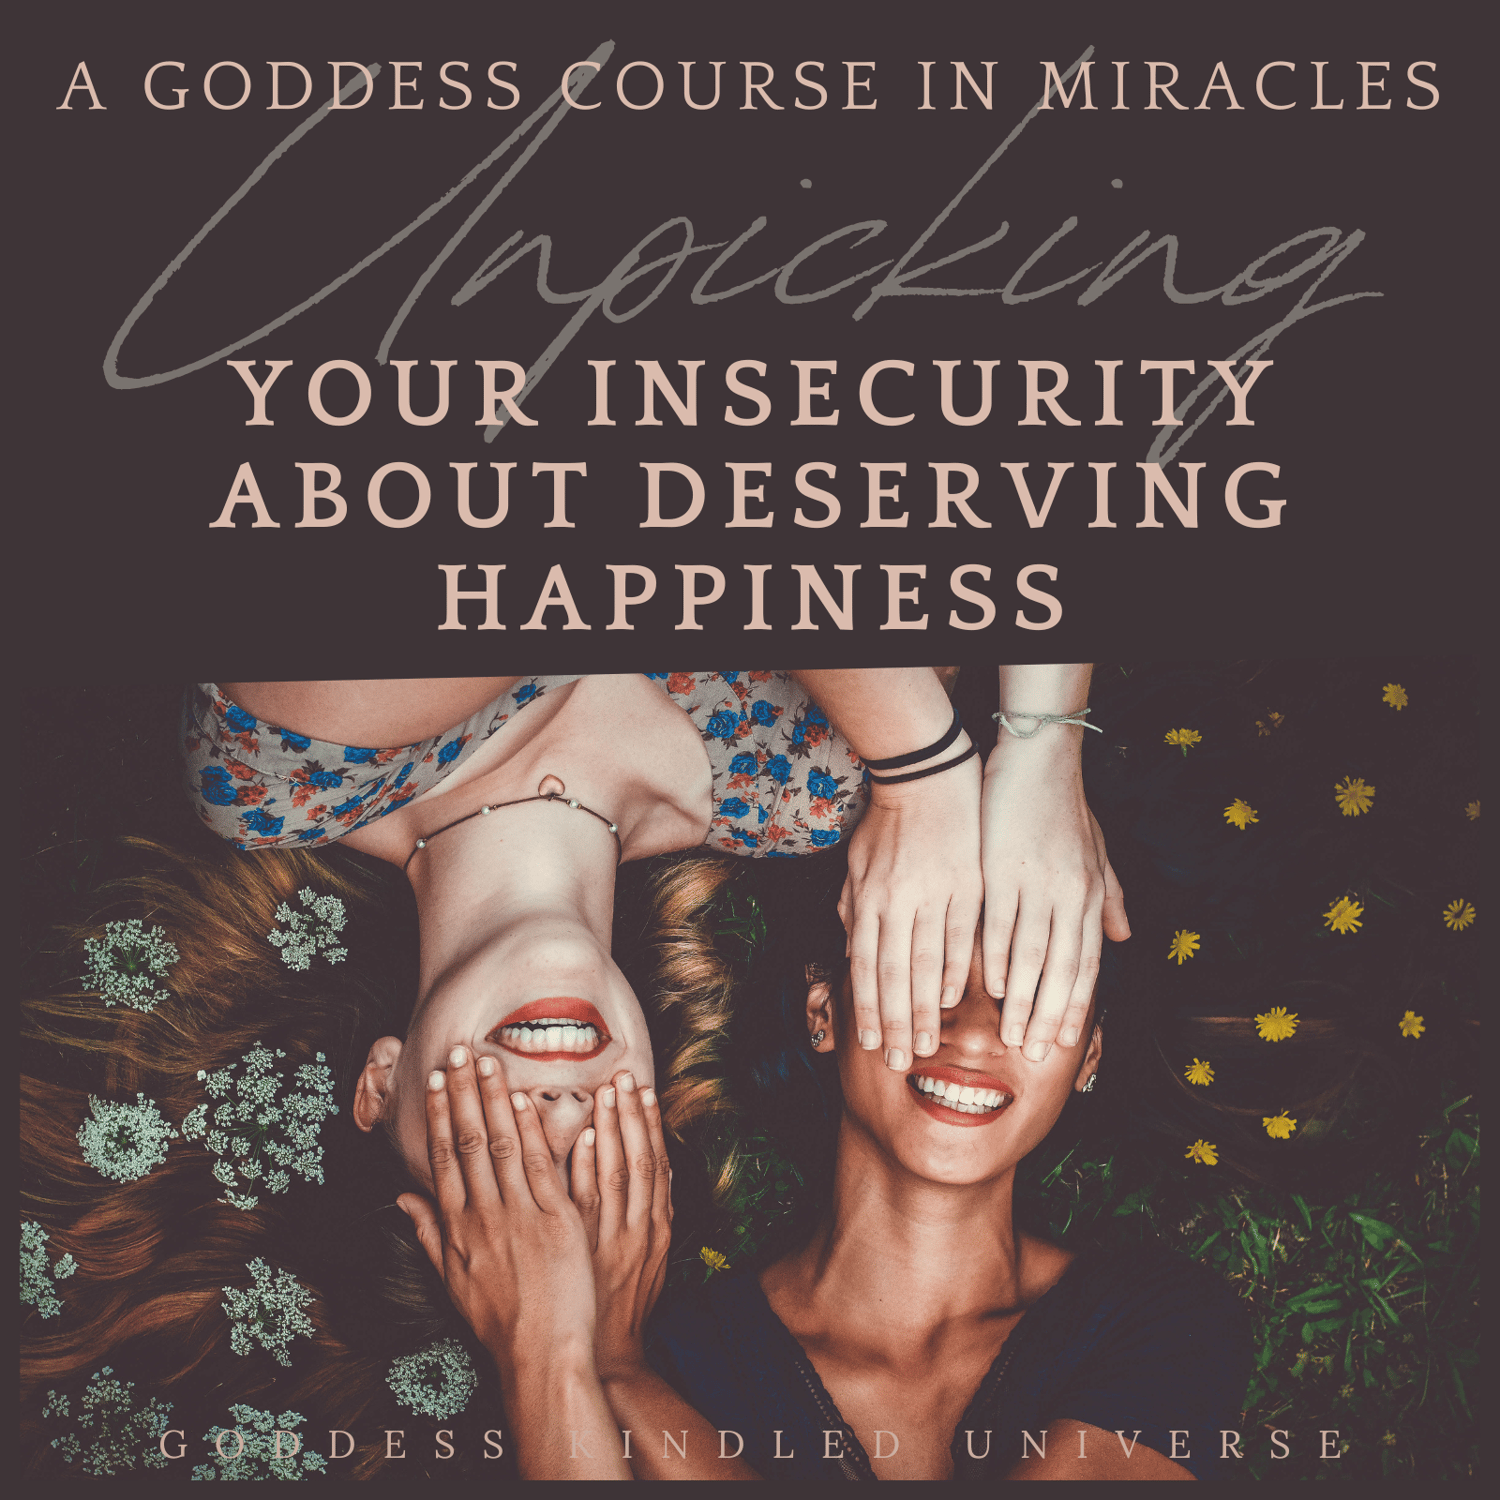 A Goddess Course In Miracles AGCIM by Sondra Turnbull at Goddess Kindled Universe